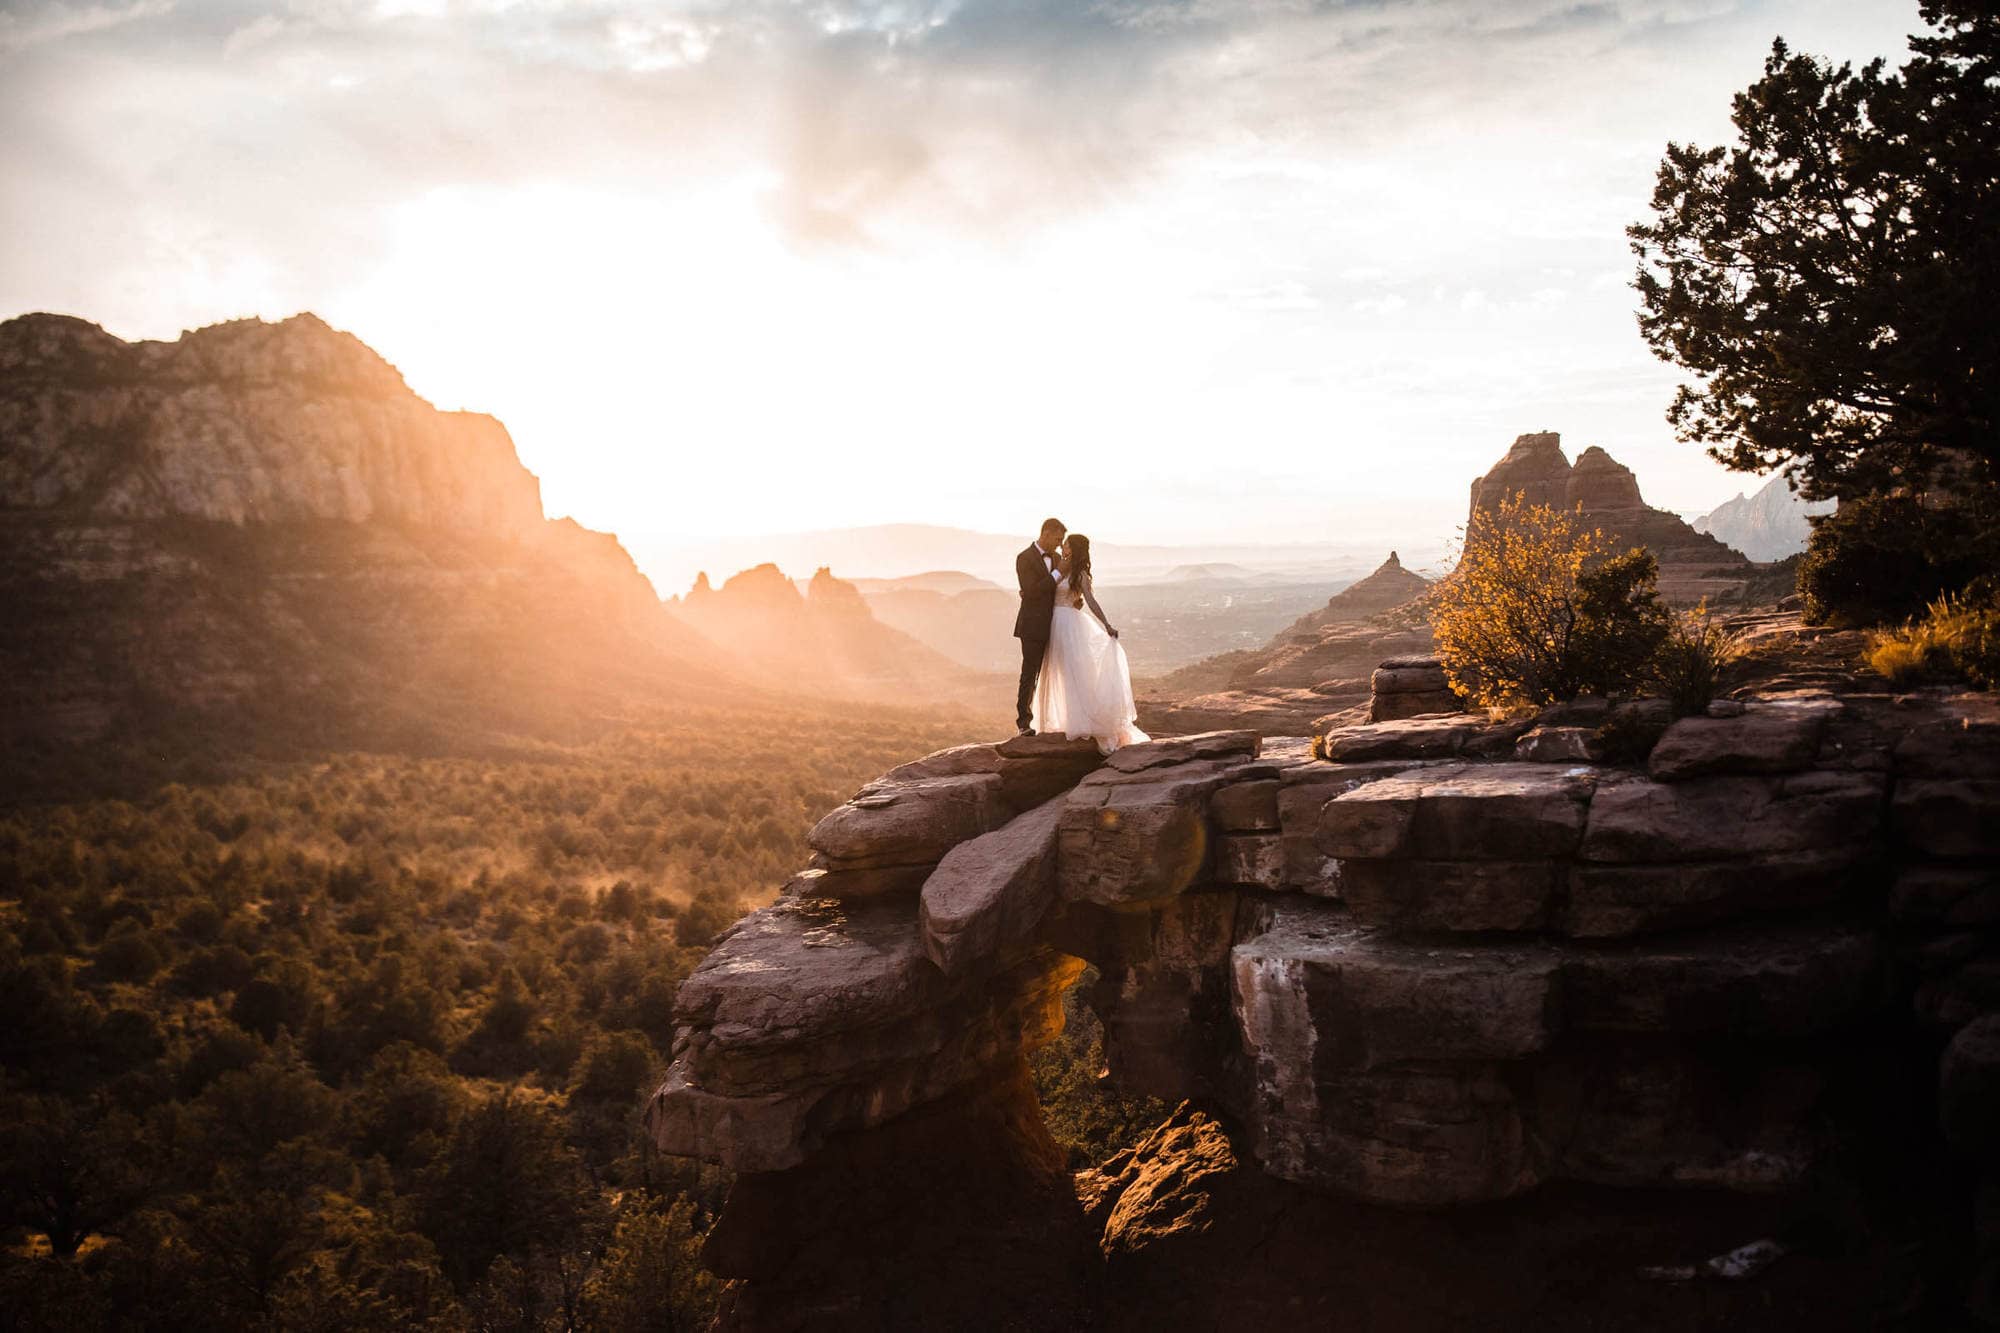 2020 was something else! Here are some of my favorite imagees from the adventure weddings and elopements to inspire your elopement planning and dreams.